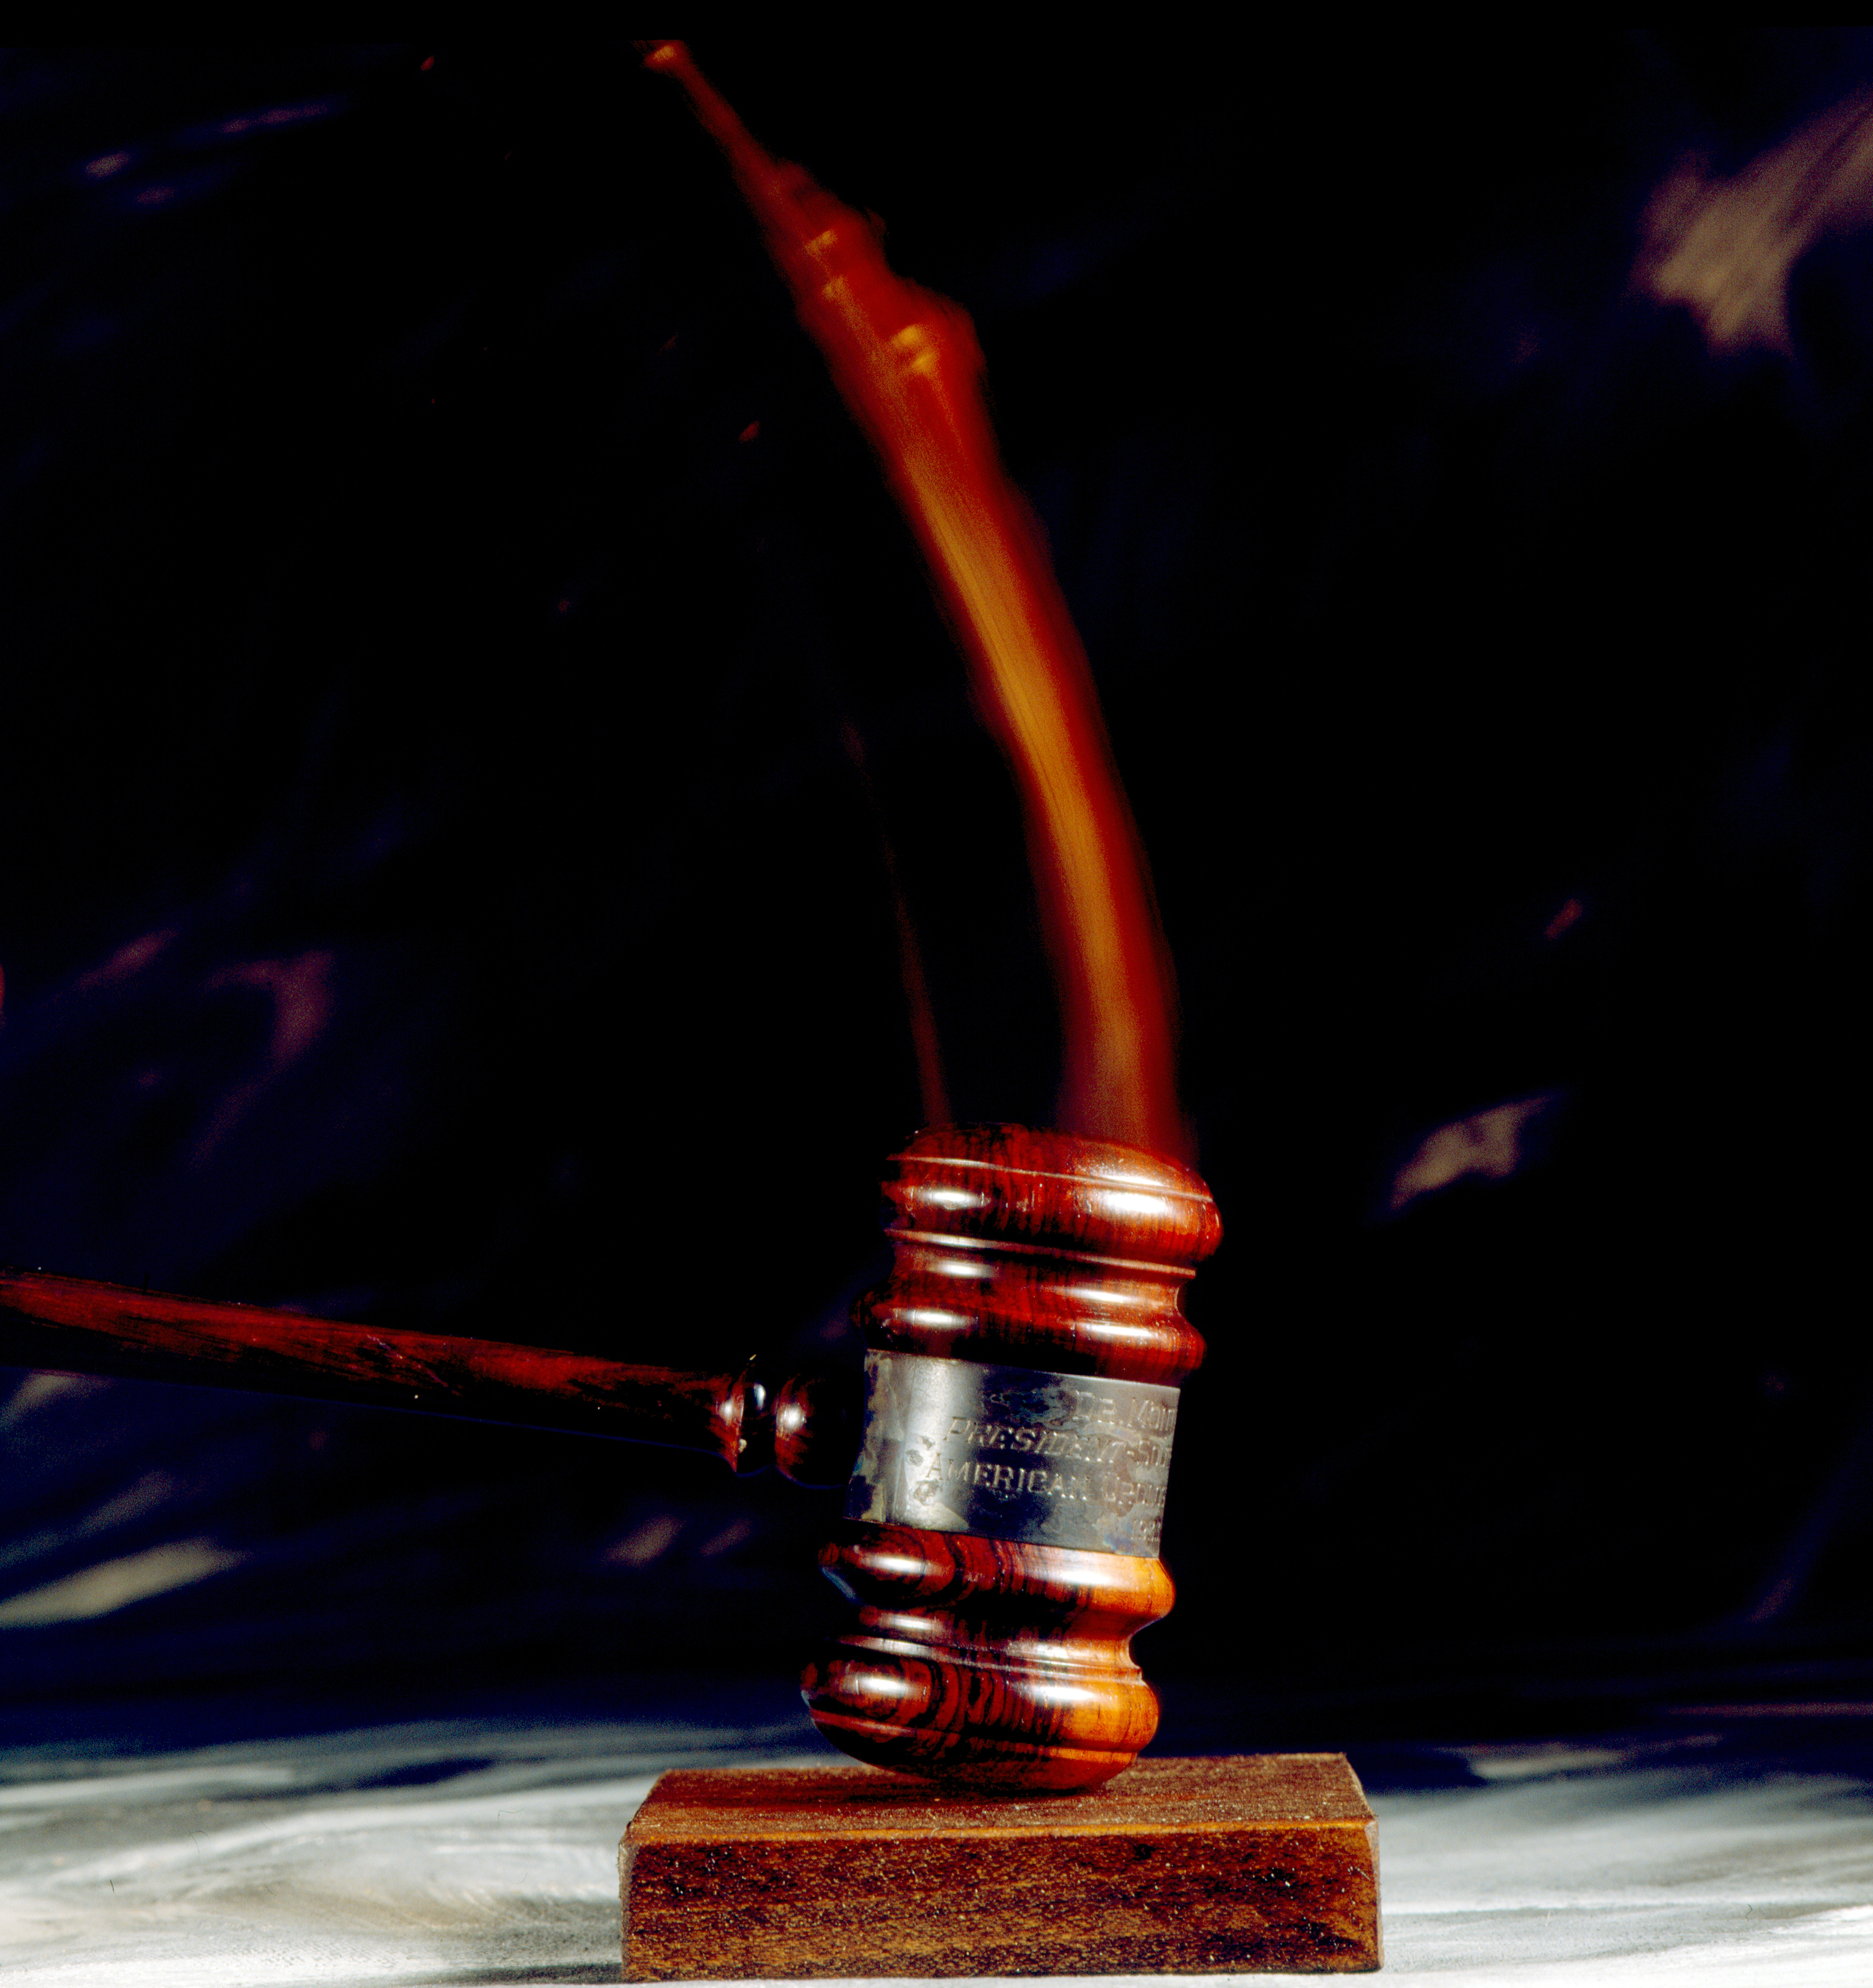 Gavel Striking Surface. Education Images&mdash;UIG via Getty Images (Education Images&mdash;UIG via Getty Images)